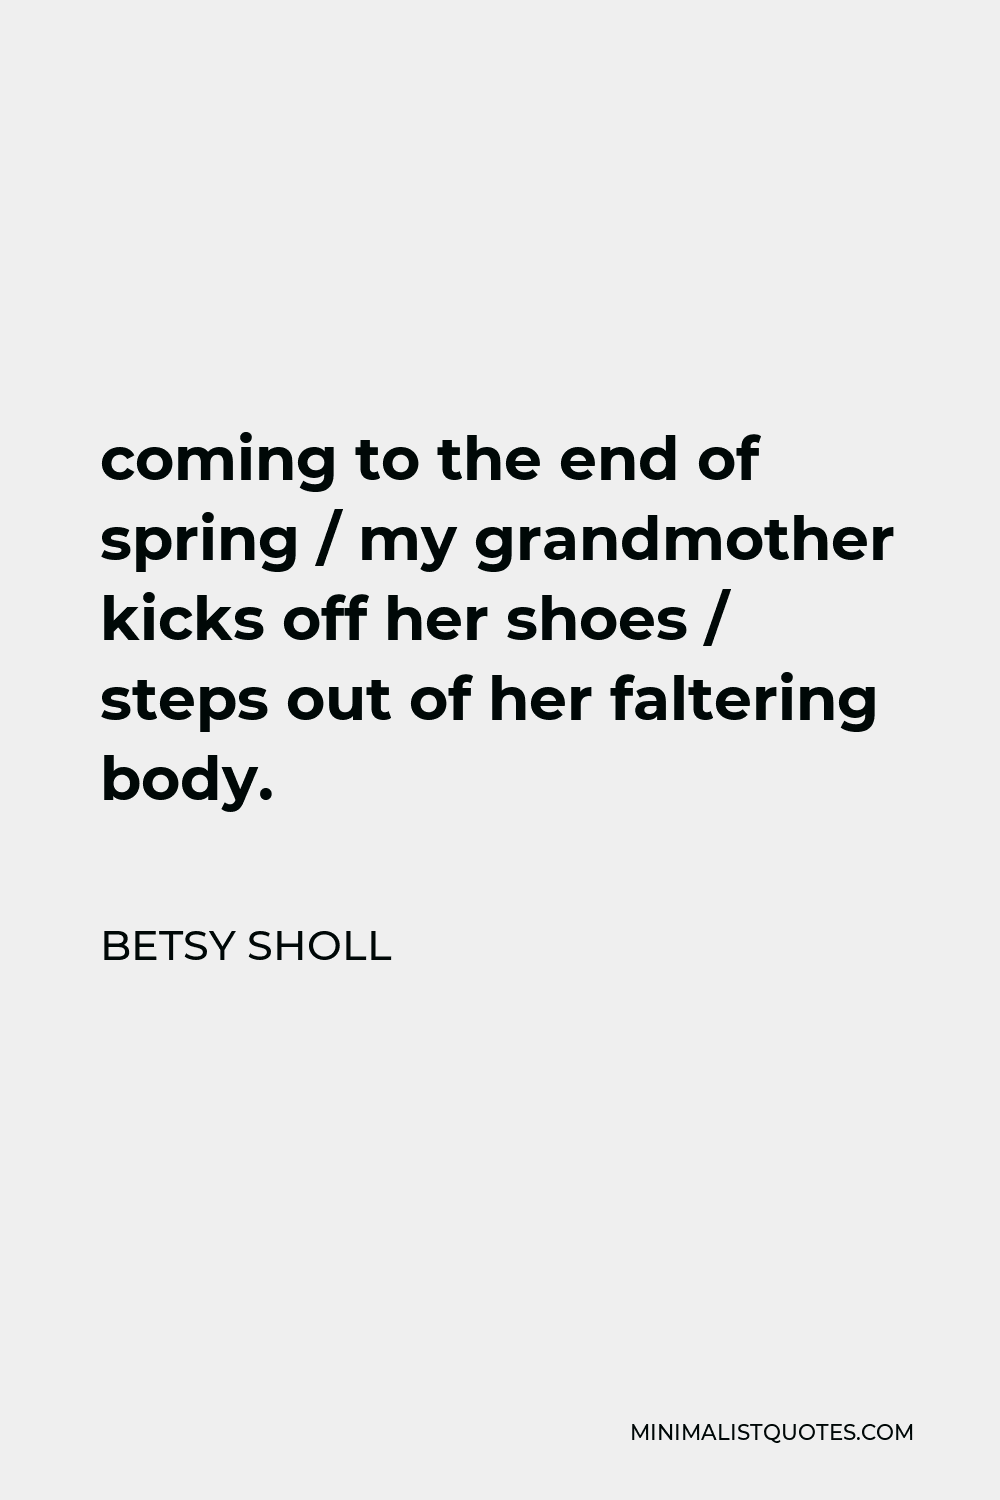 Betsy Sholl Quote - coming to the end of spring / my grandmother kicks off her shoes / steps out of her faltering body.